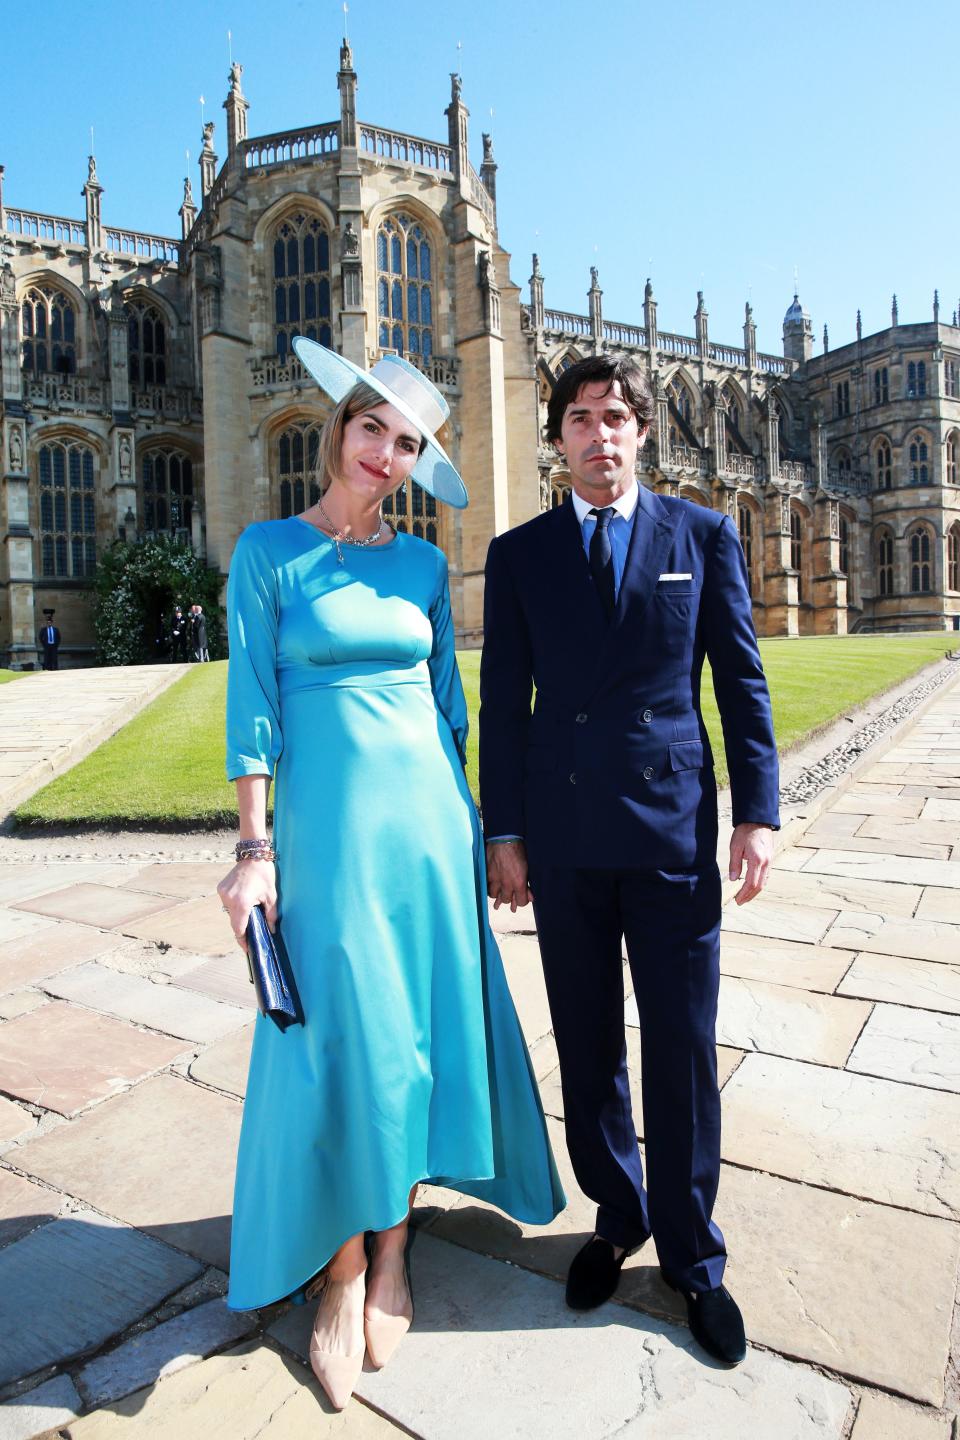 Windsor Castle is a can't-miss site for design lovers visiting Windsor—and it is where Figueras and Blaquier attended the wedding of their good friend Prince Harry in 2018.